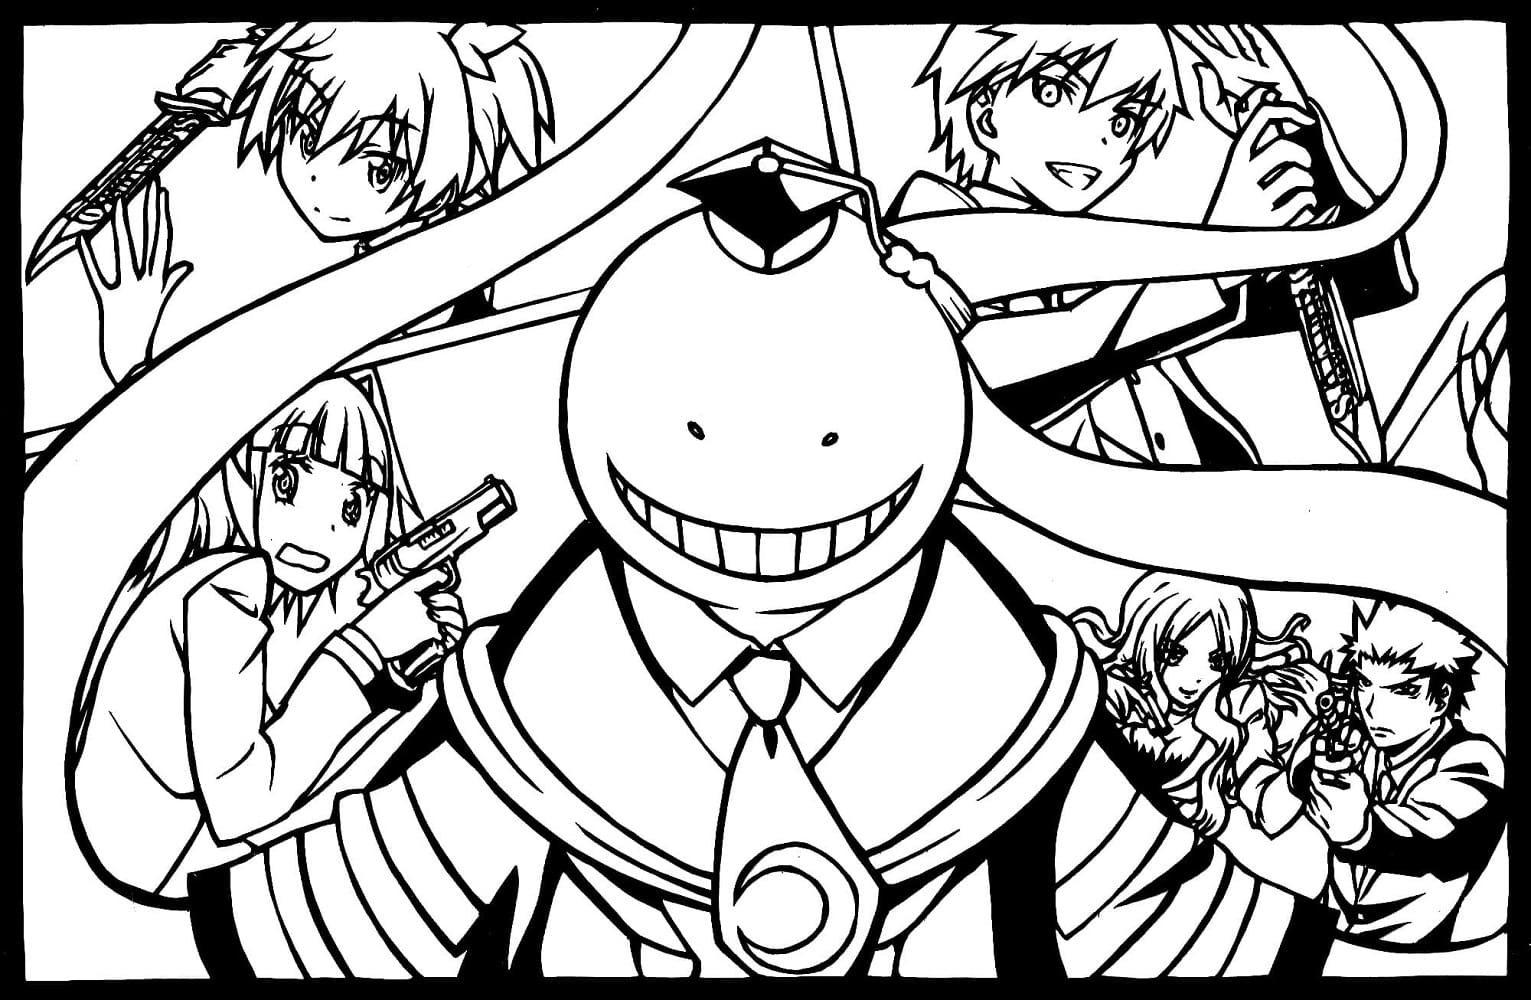 Characters from Assassination Classroom